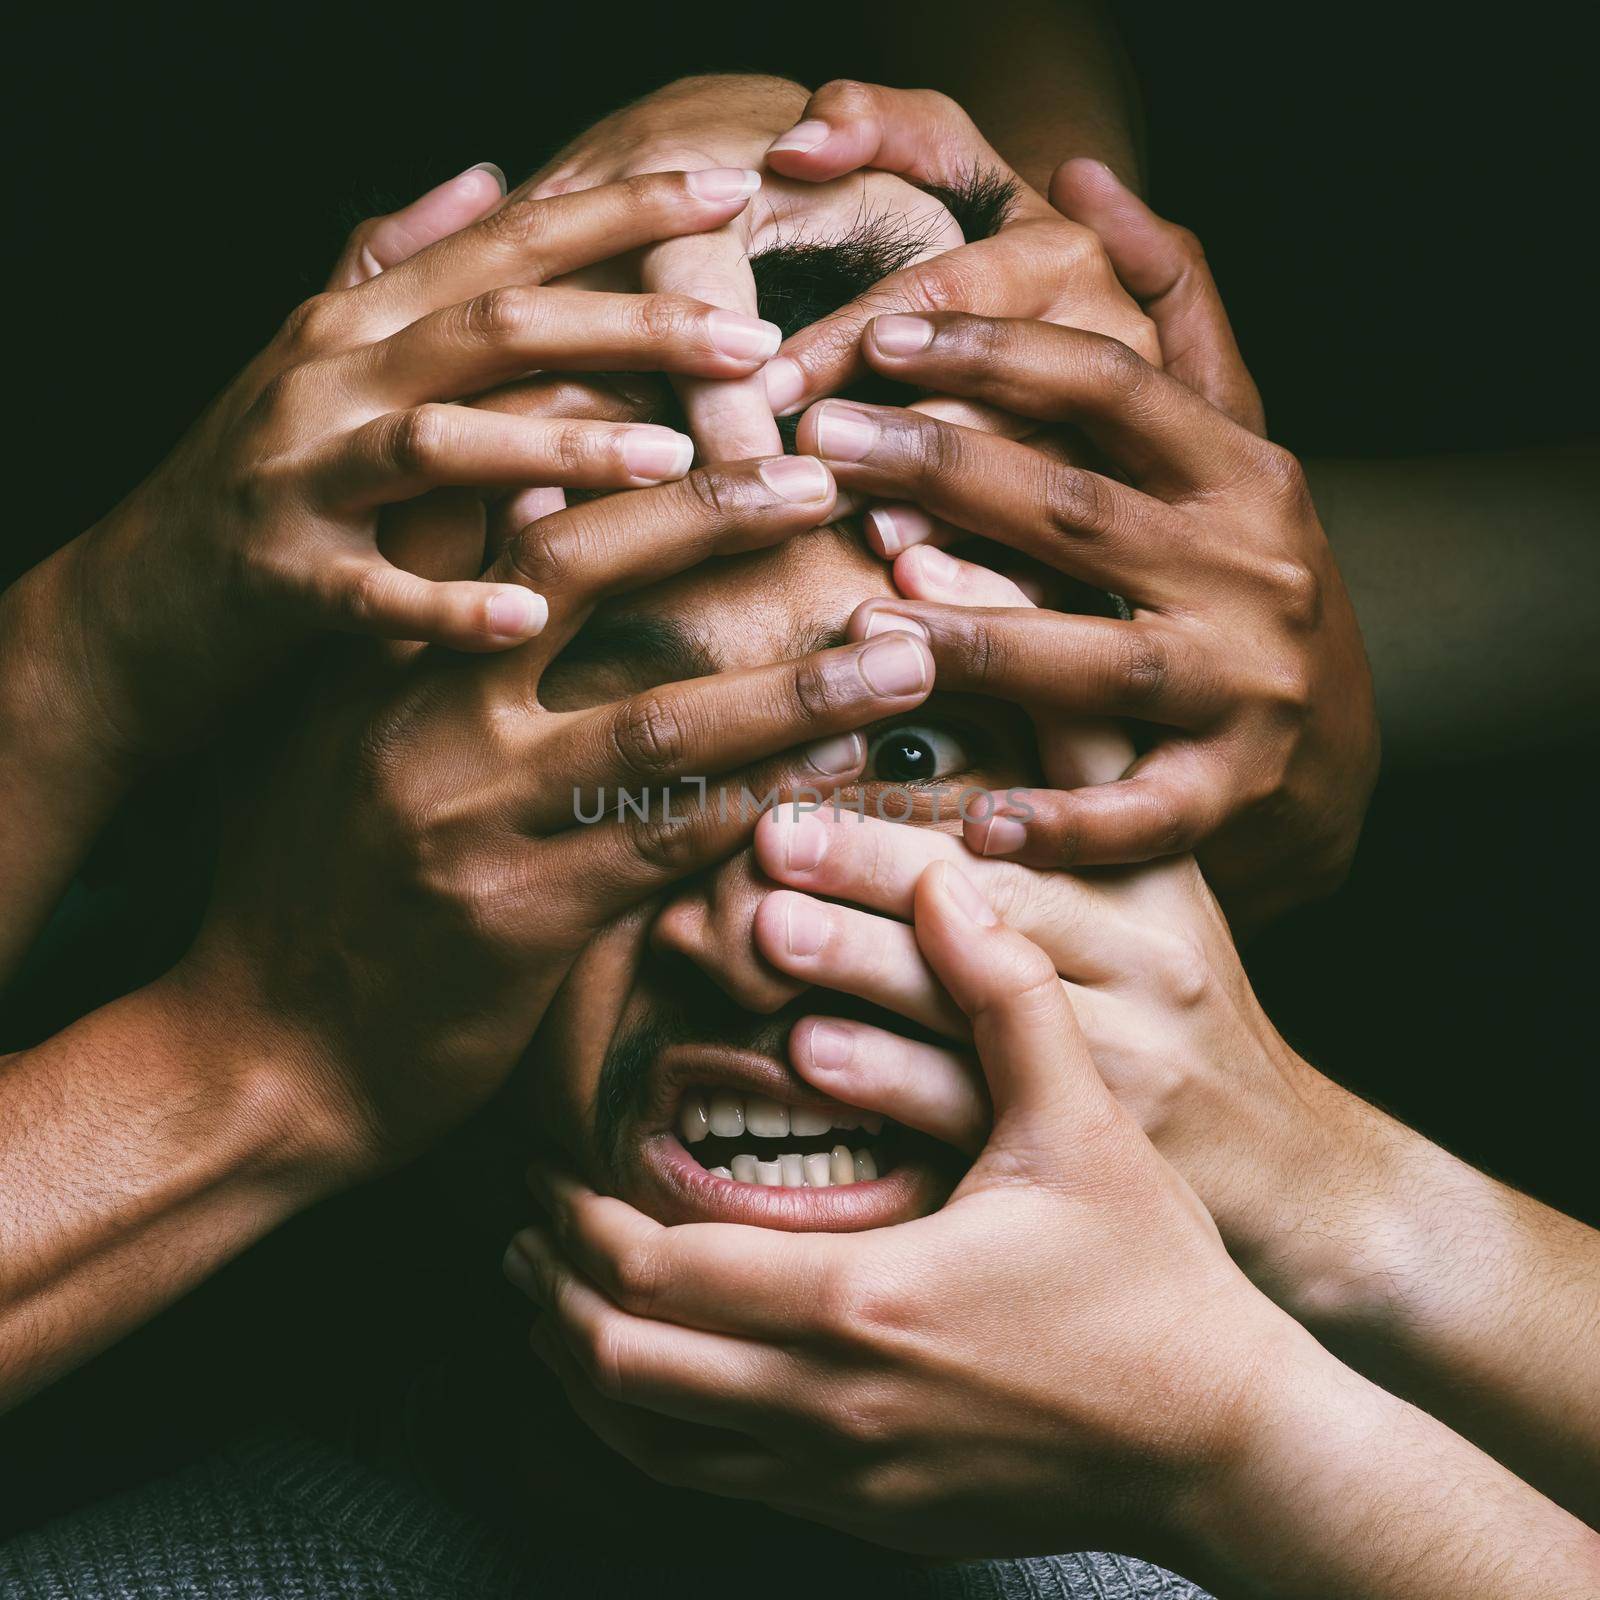 Shot of hands grabbing a young mans face against a dark background.